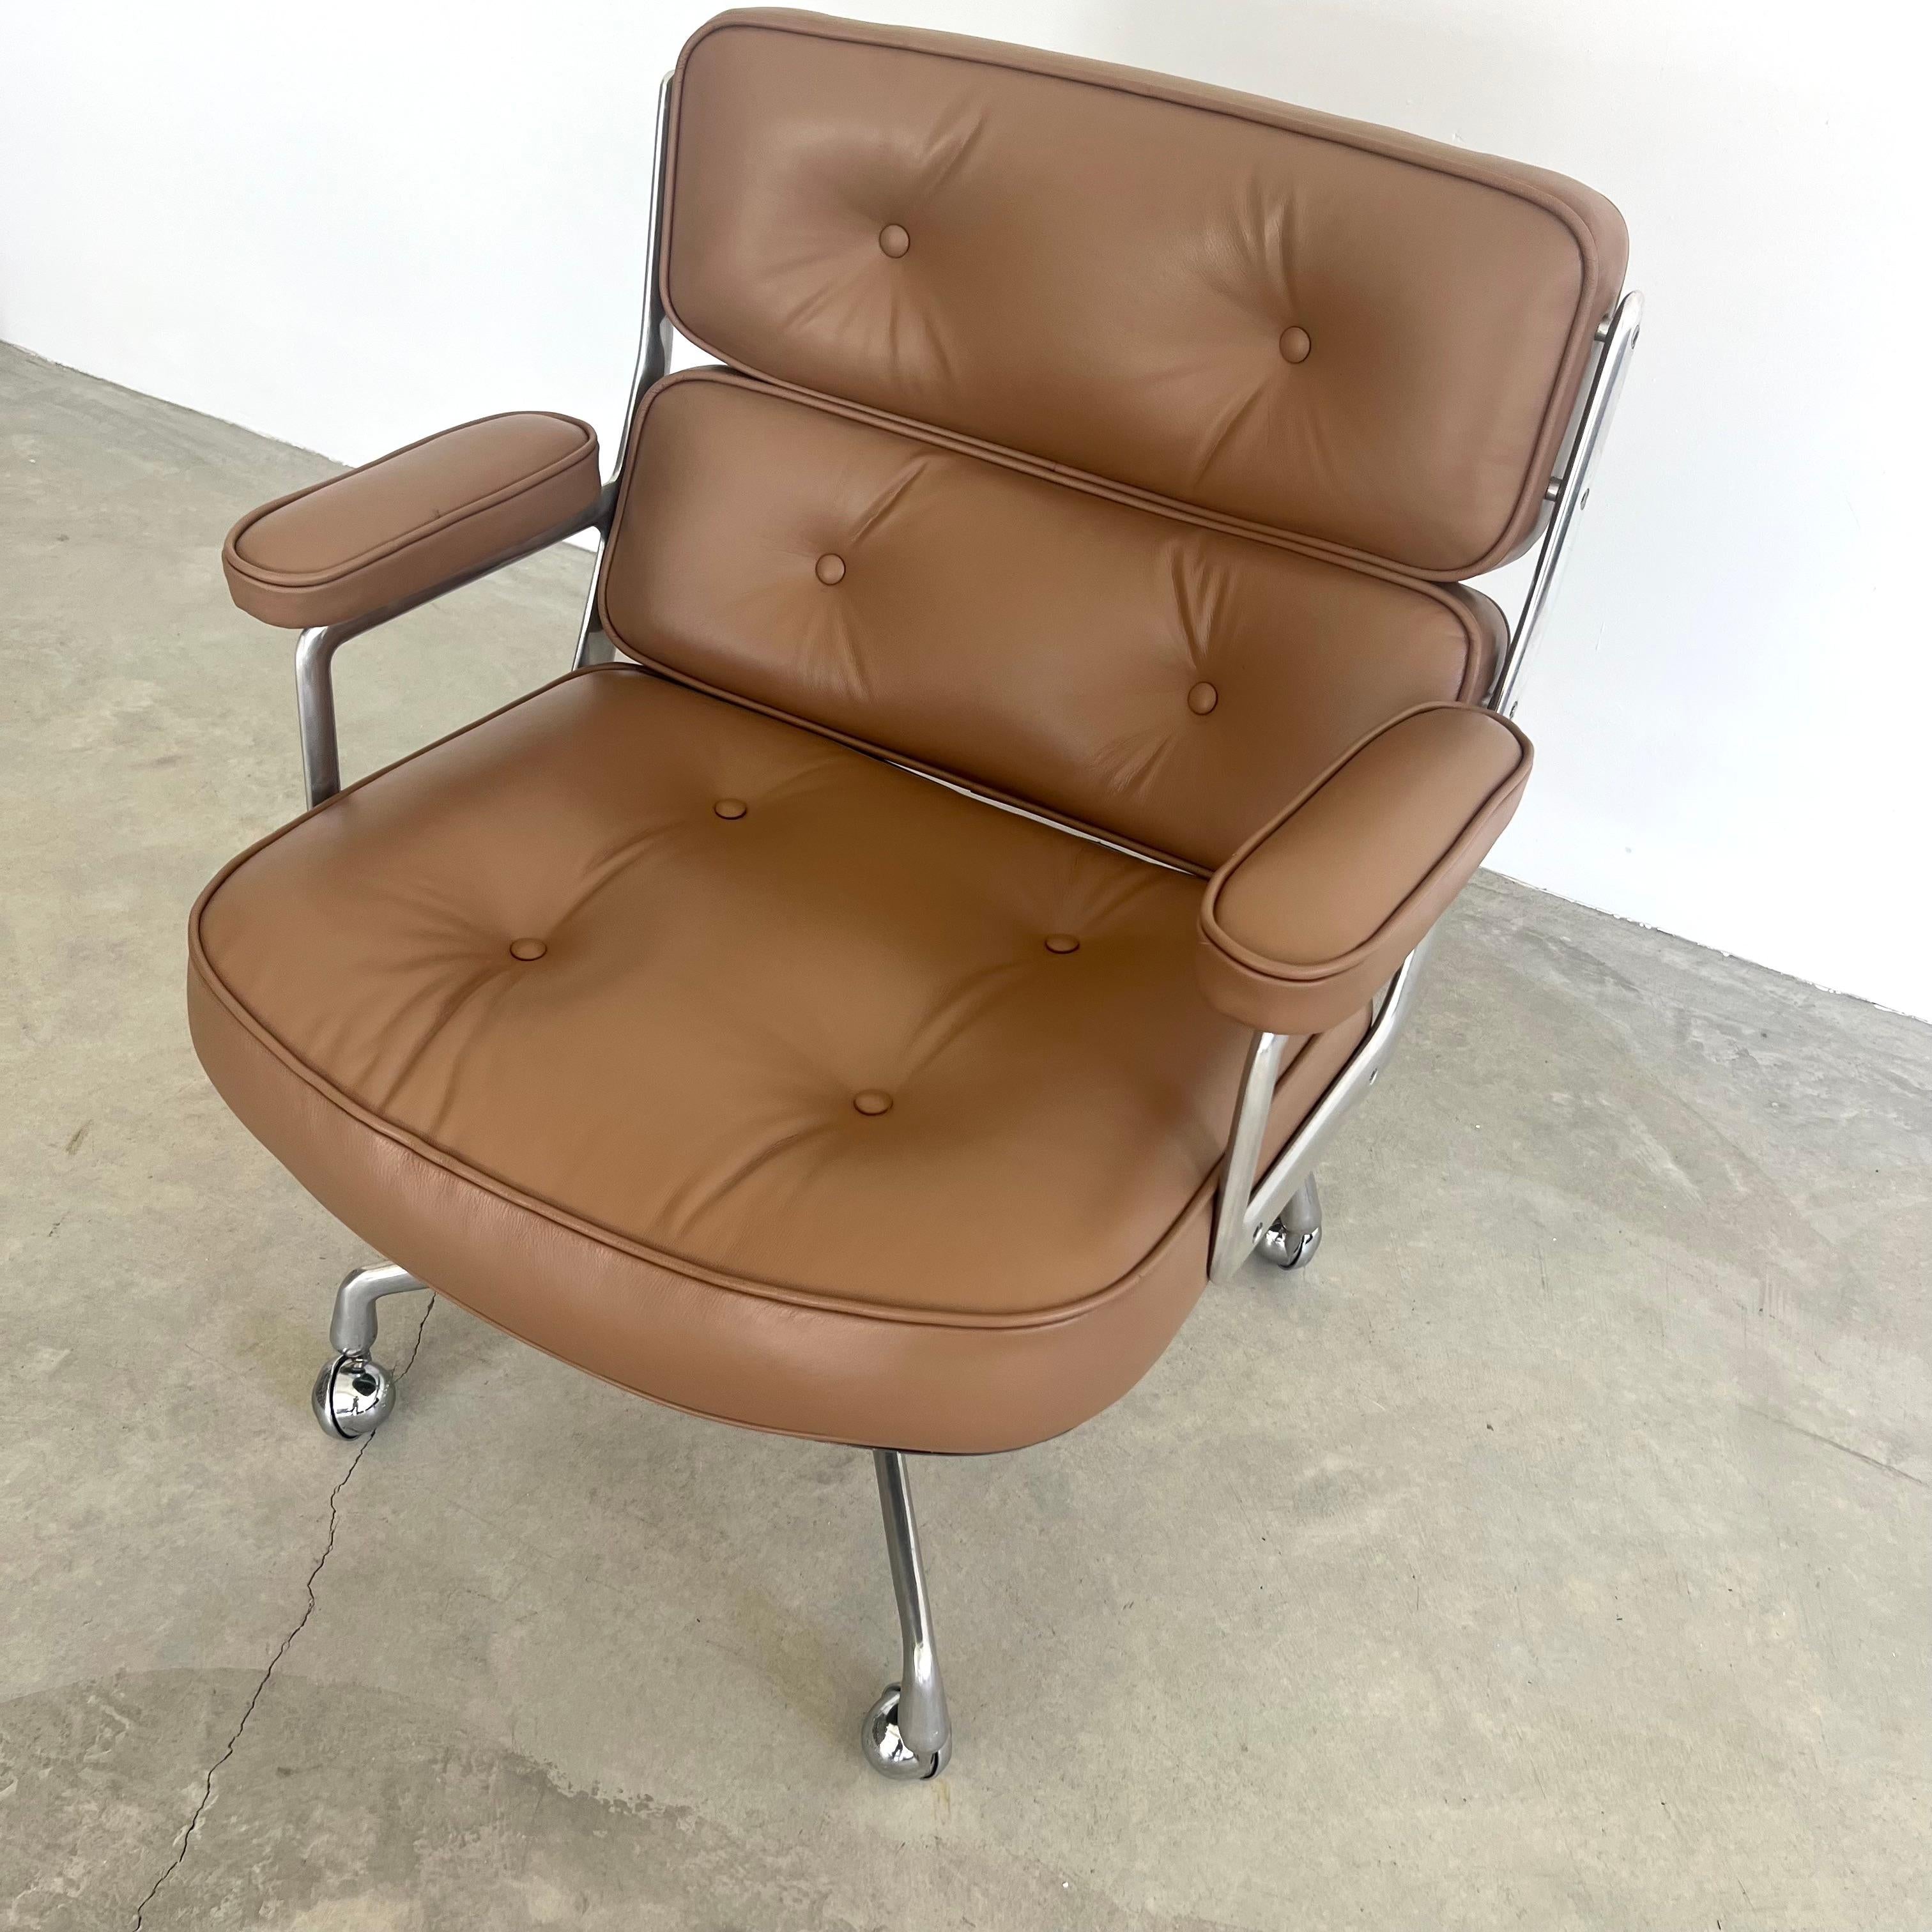 Eames Time Life Lobby Lounge Chair in Tan Leather for Herman Miller, 1980s USA 1